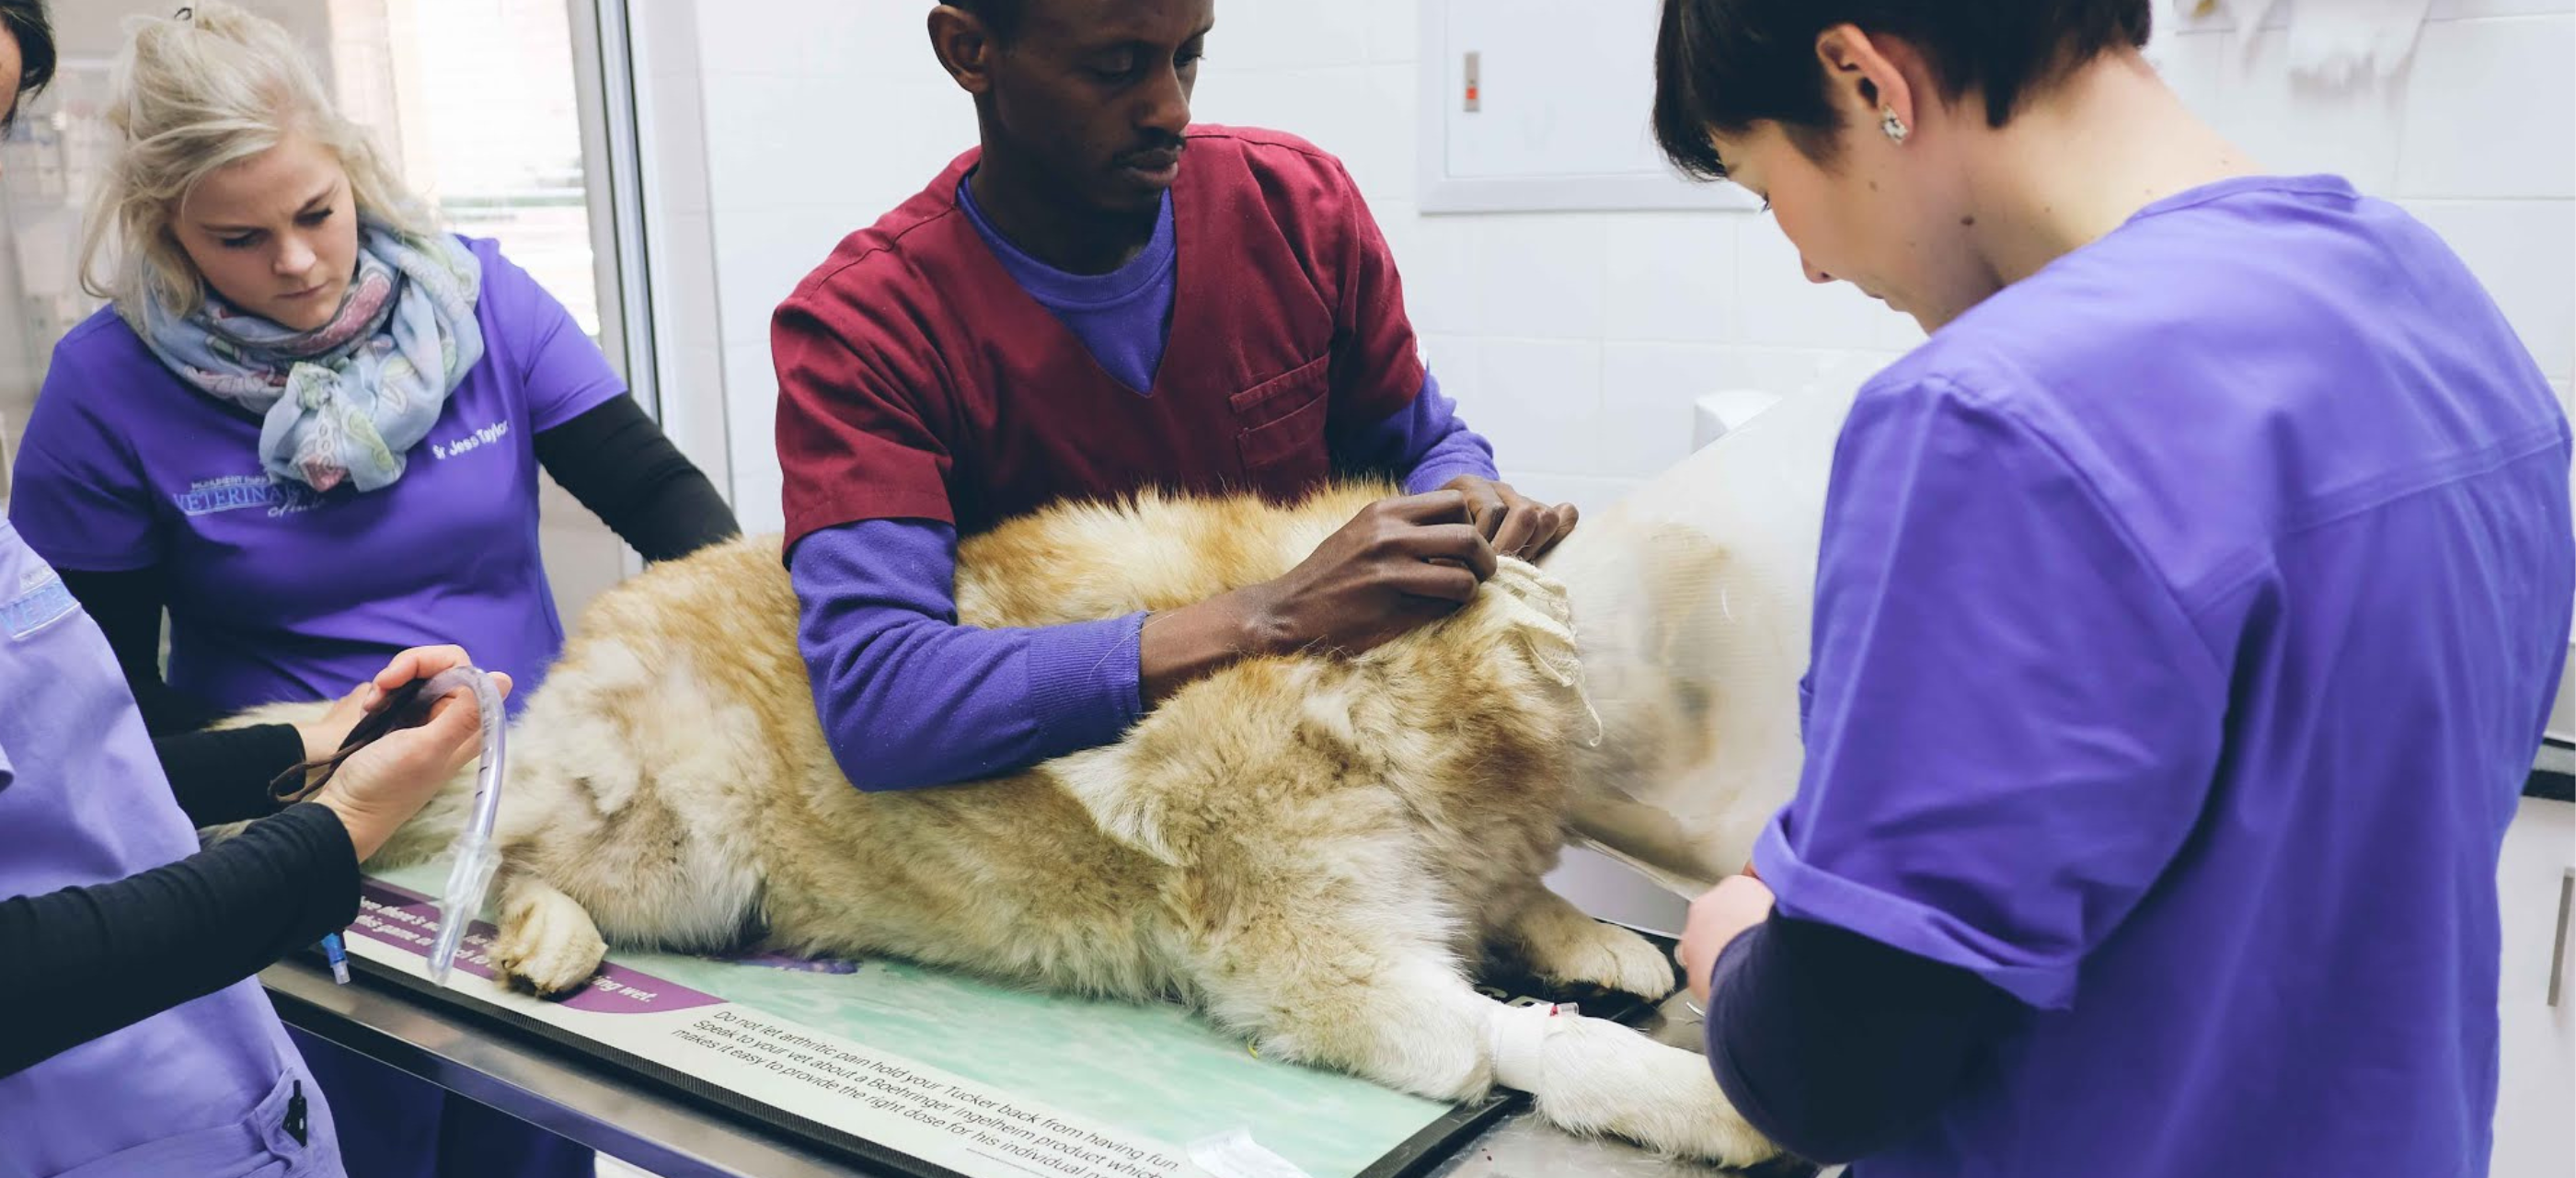 Our veterinarians are equipped to perform a wide range of soft tissue and orthopedic surgeries, cesarean sections and dentals.